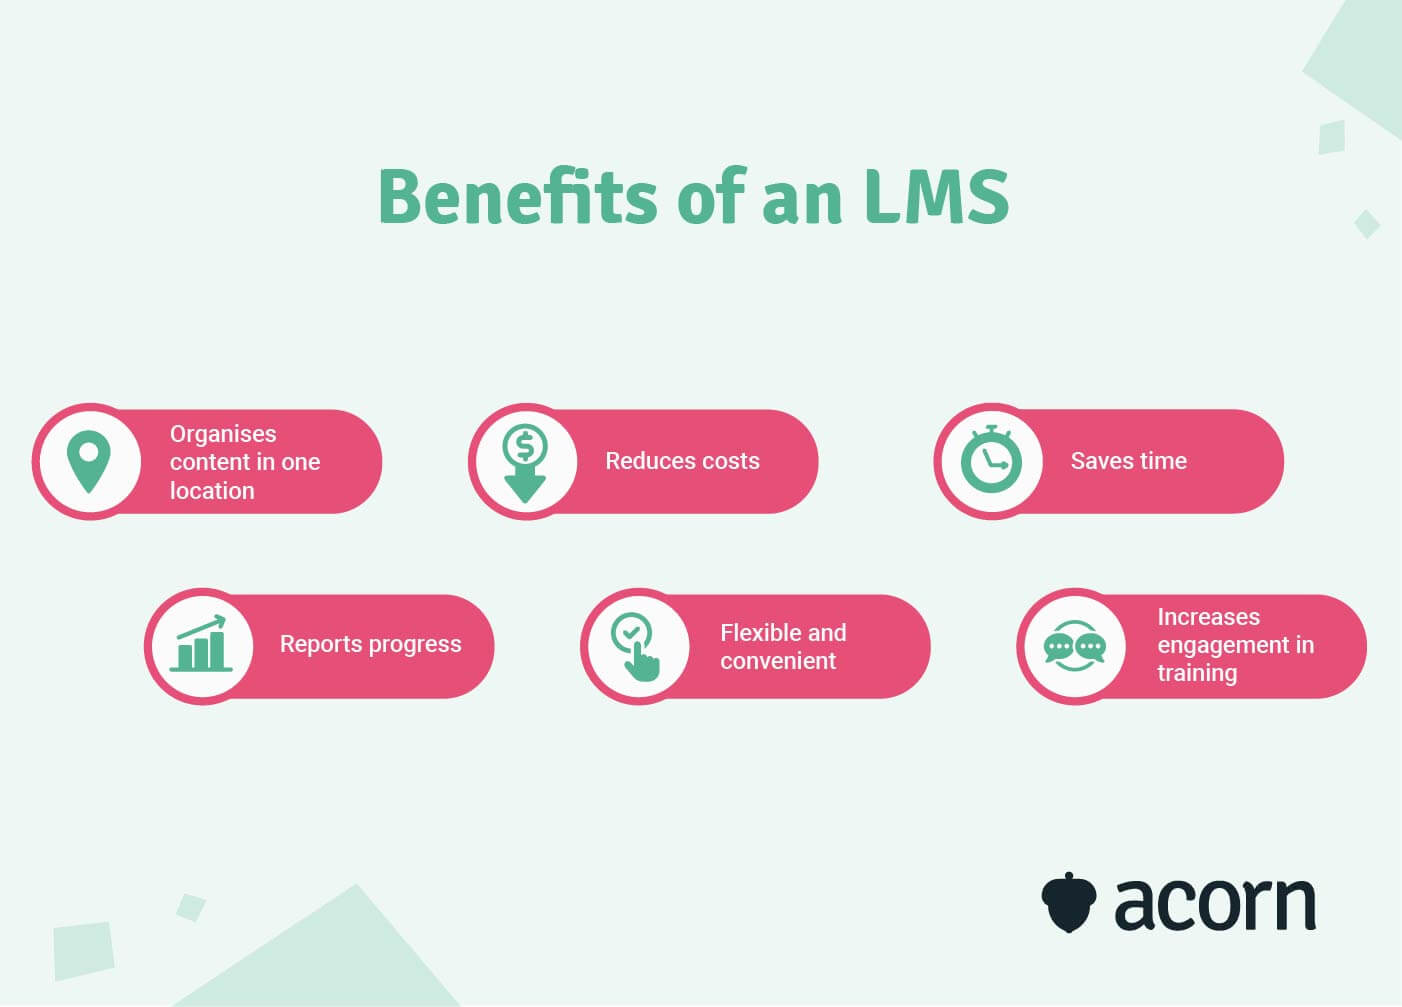 The benefits of a learning management system for organisations